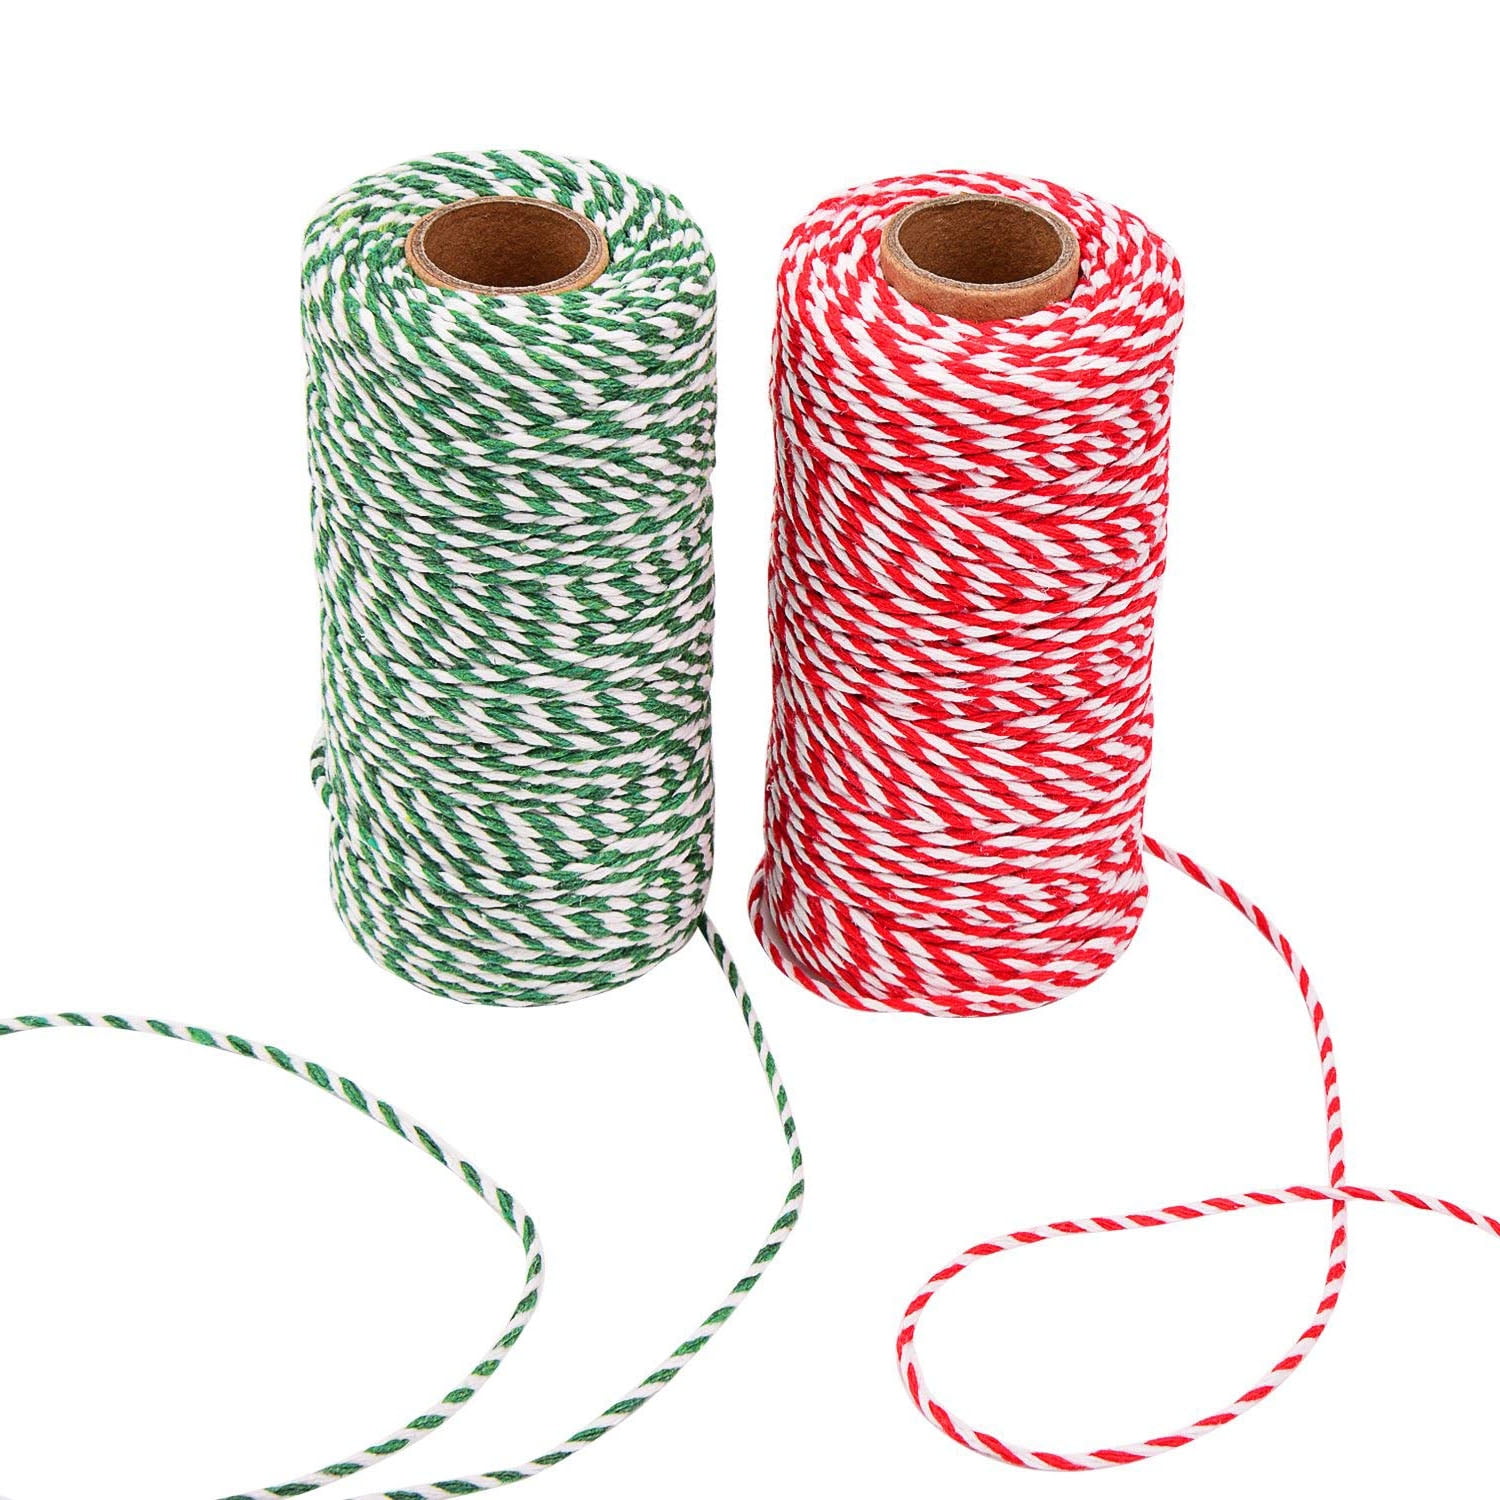 Utop Rope Cotton Twine String for Crafts Bakers Twine Rope Craft String Cotton Cord use for Cooking Twine and Butchers Twine 